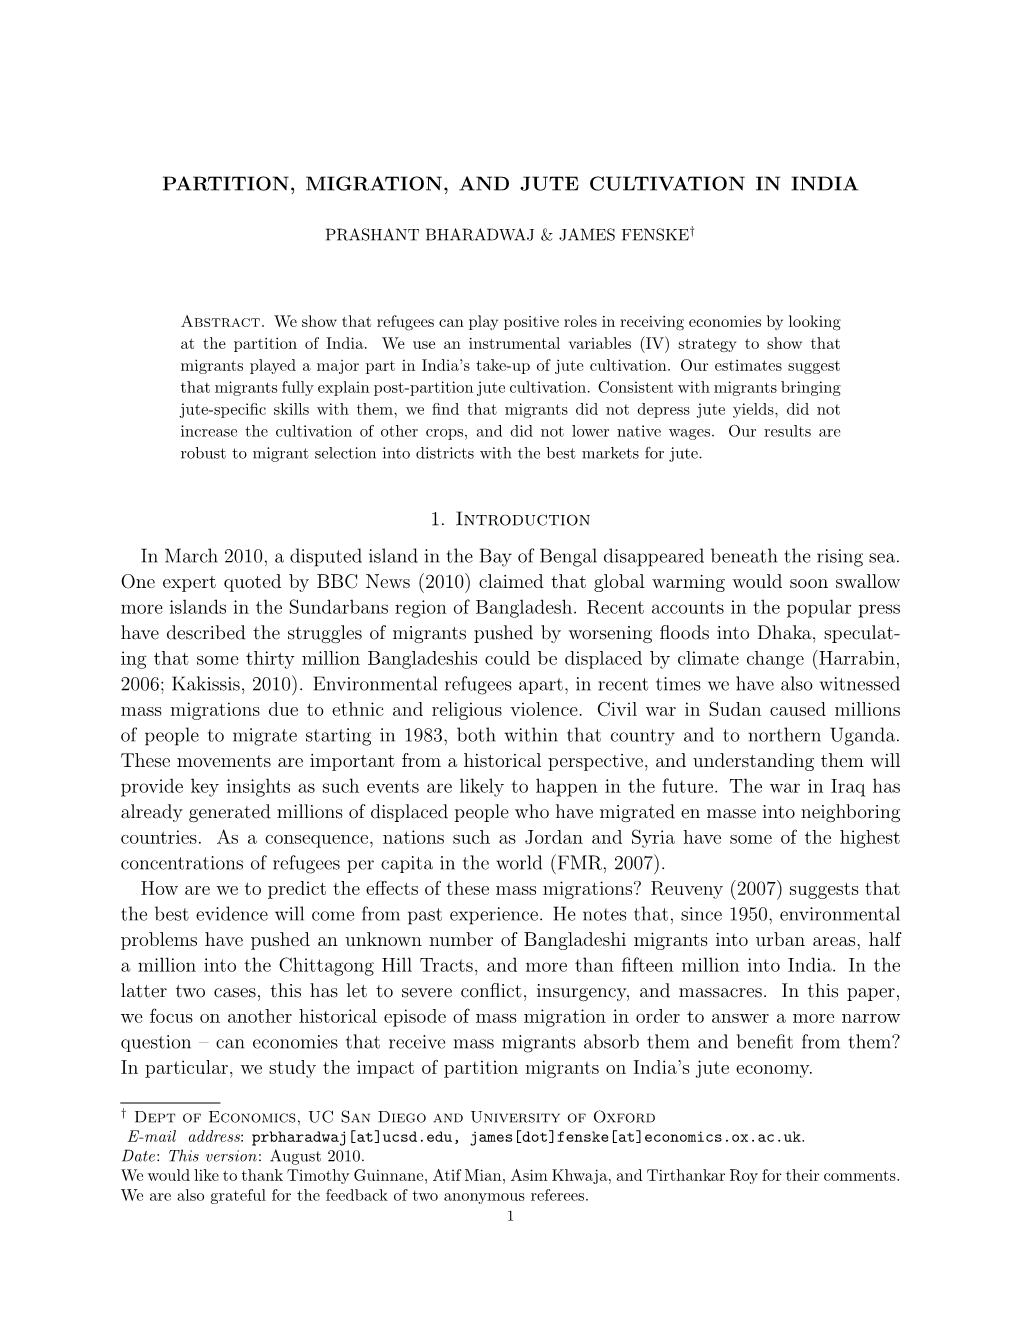 Partition, Migration and Jute Cultivation in India